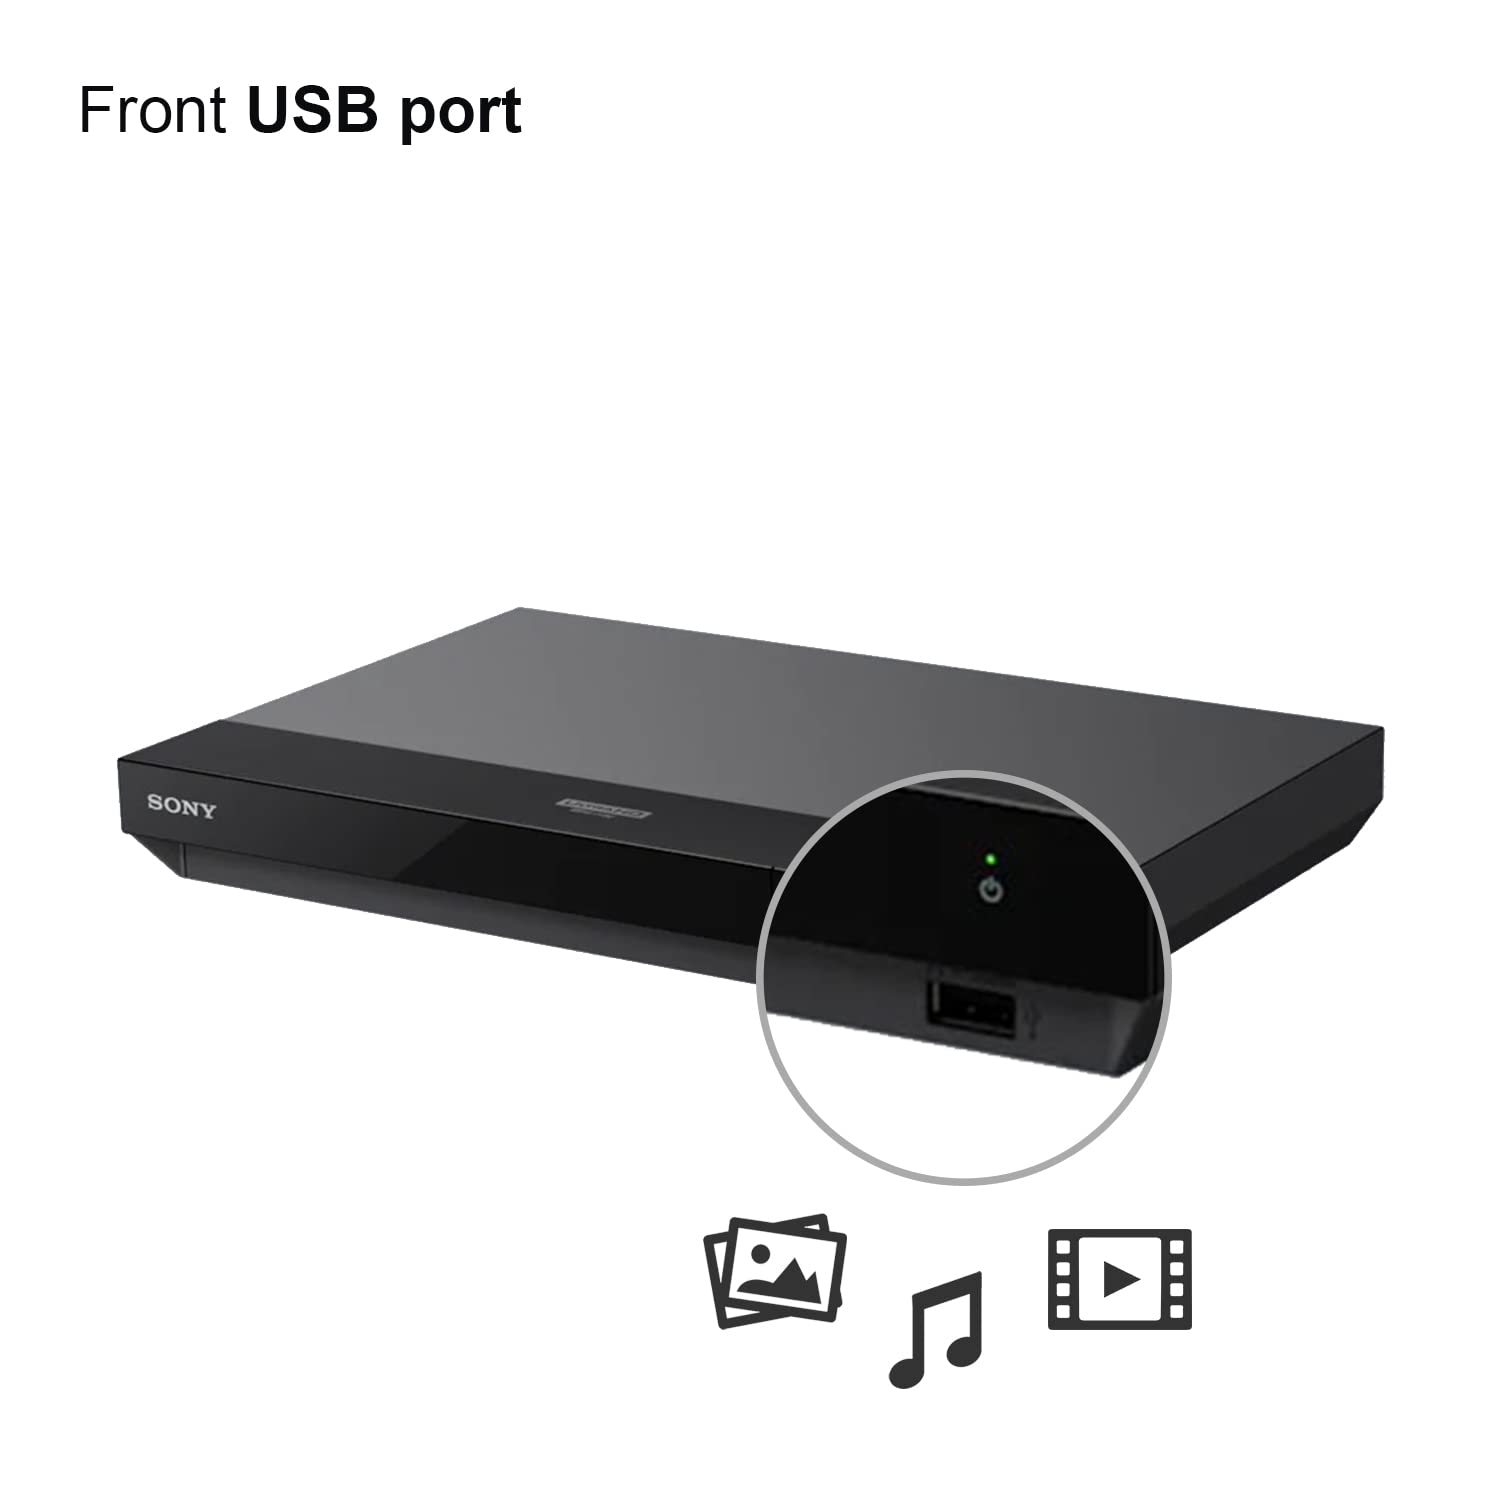 Sony UBP-X700/M, 4k Blu Ray Player For TV with Ultra HD Vision, HDR, WiFi for Streaming Netflix, YouTube or Disney+ & more. Includes HDMI Cable, Remote Control, Bluray/DVD Disc Cleaner, Cleaning Cloth